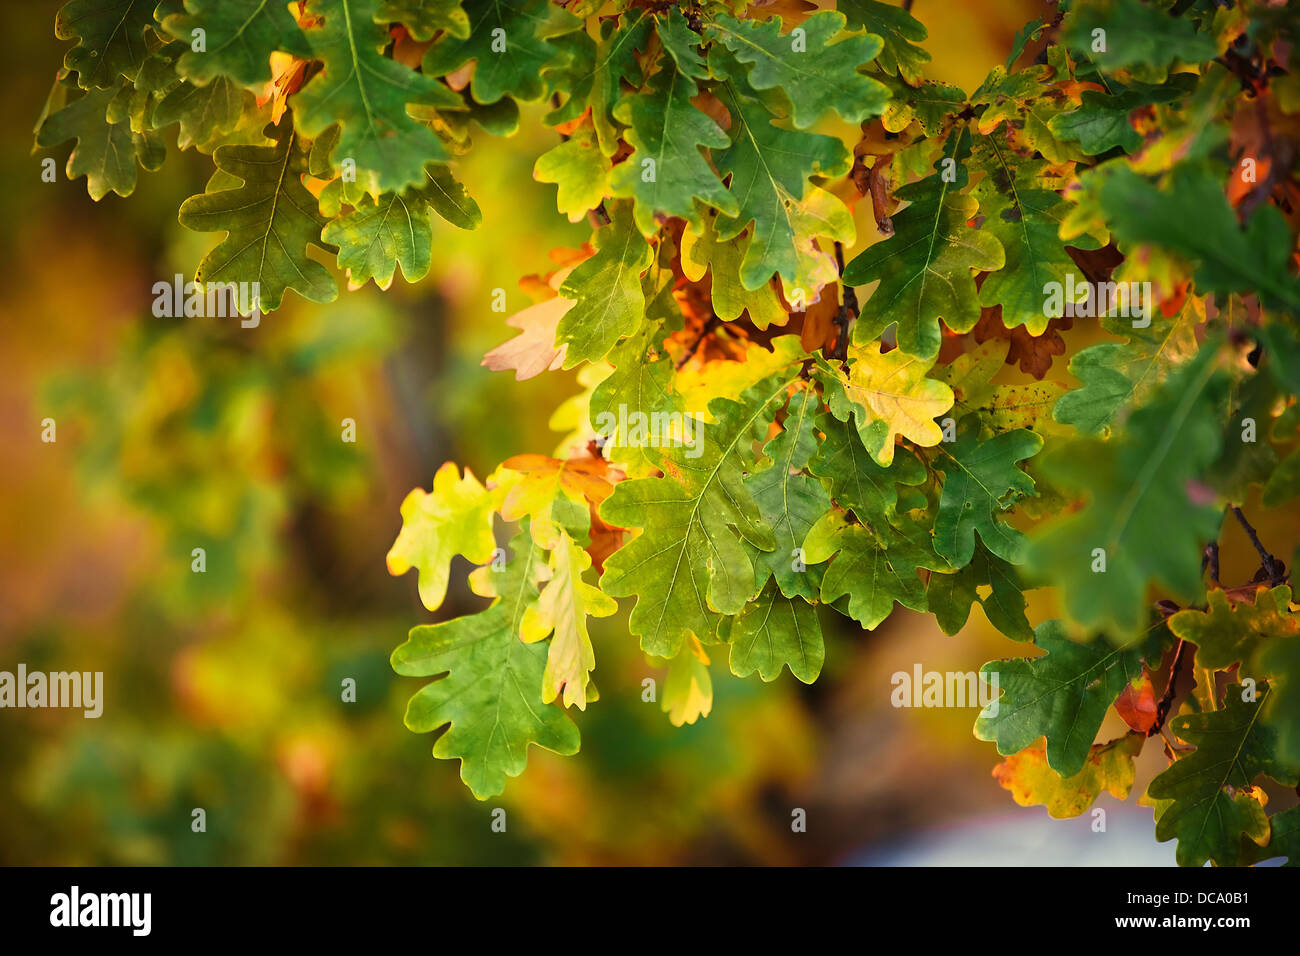 background from autumn green and orange leaves Stock Photo